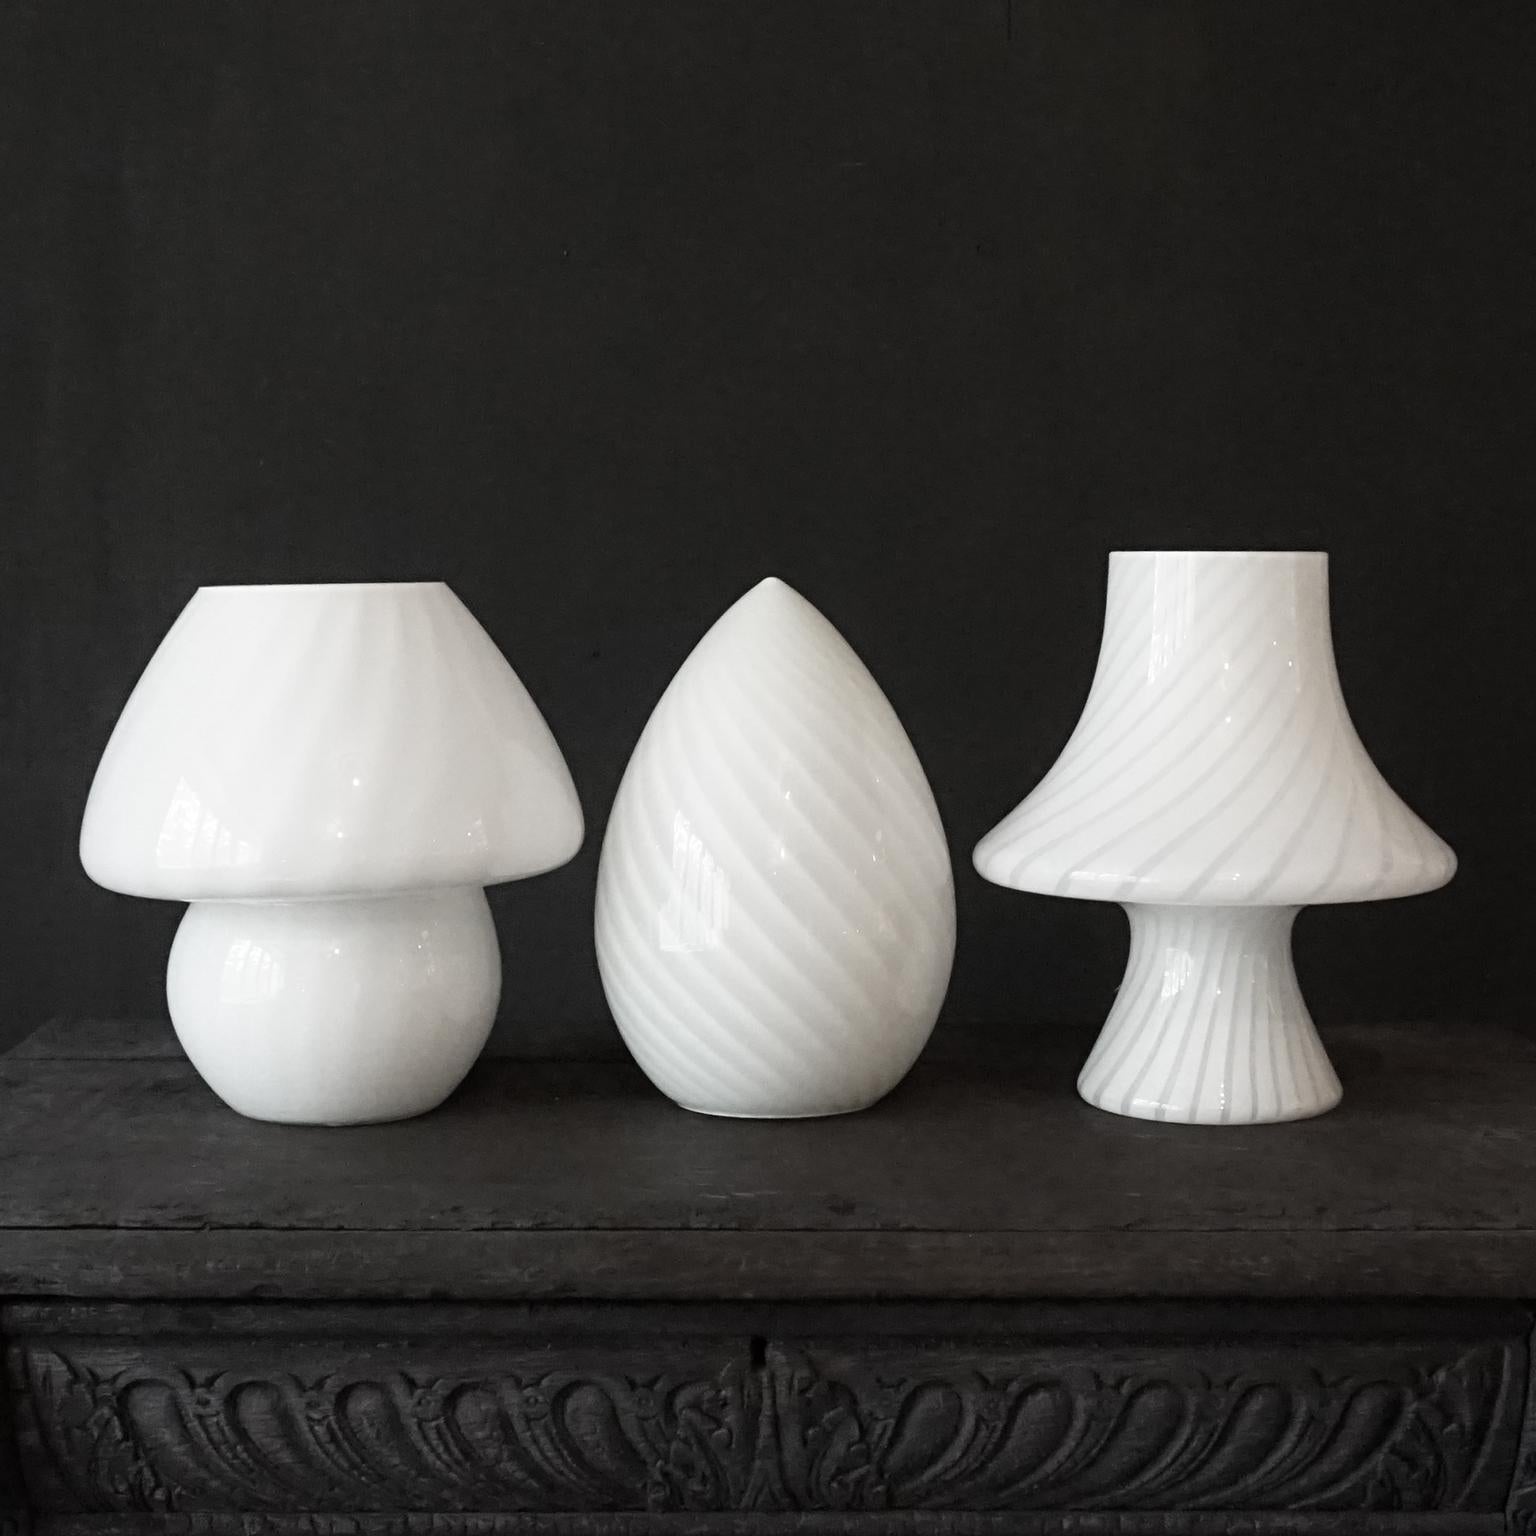 Gorgeous set of three vintage Hollywood Regency style 1980s medium size Murano white cased swirl art glass lamp shades. Two mushrooms models and an egg model.

Made of hand blown frosted cased glass. With opaque white and clear swirls. 
It looks